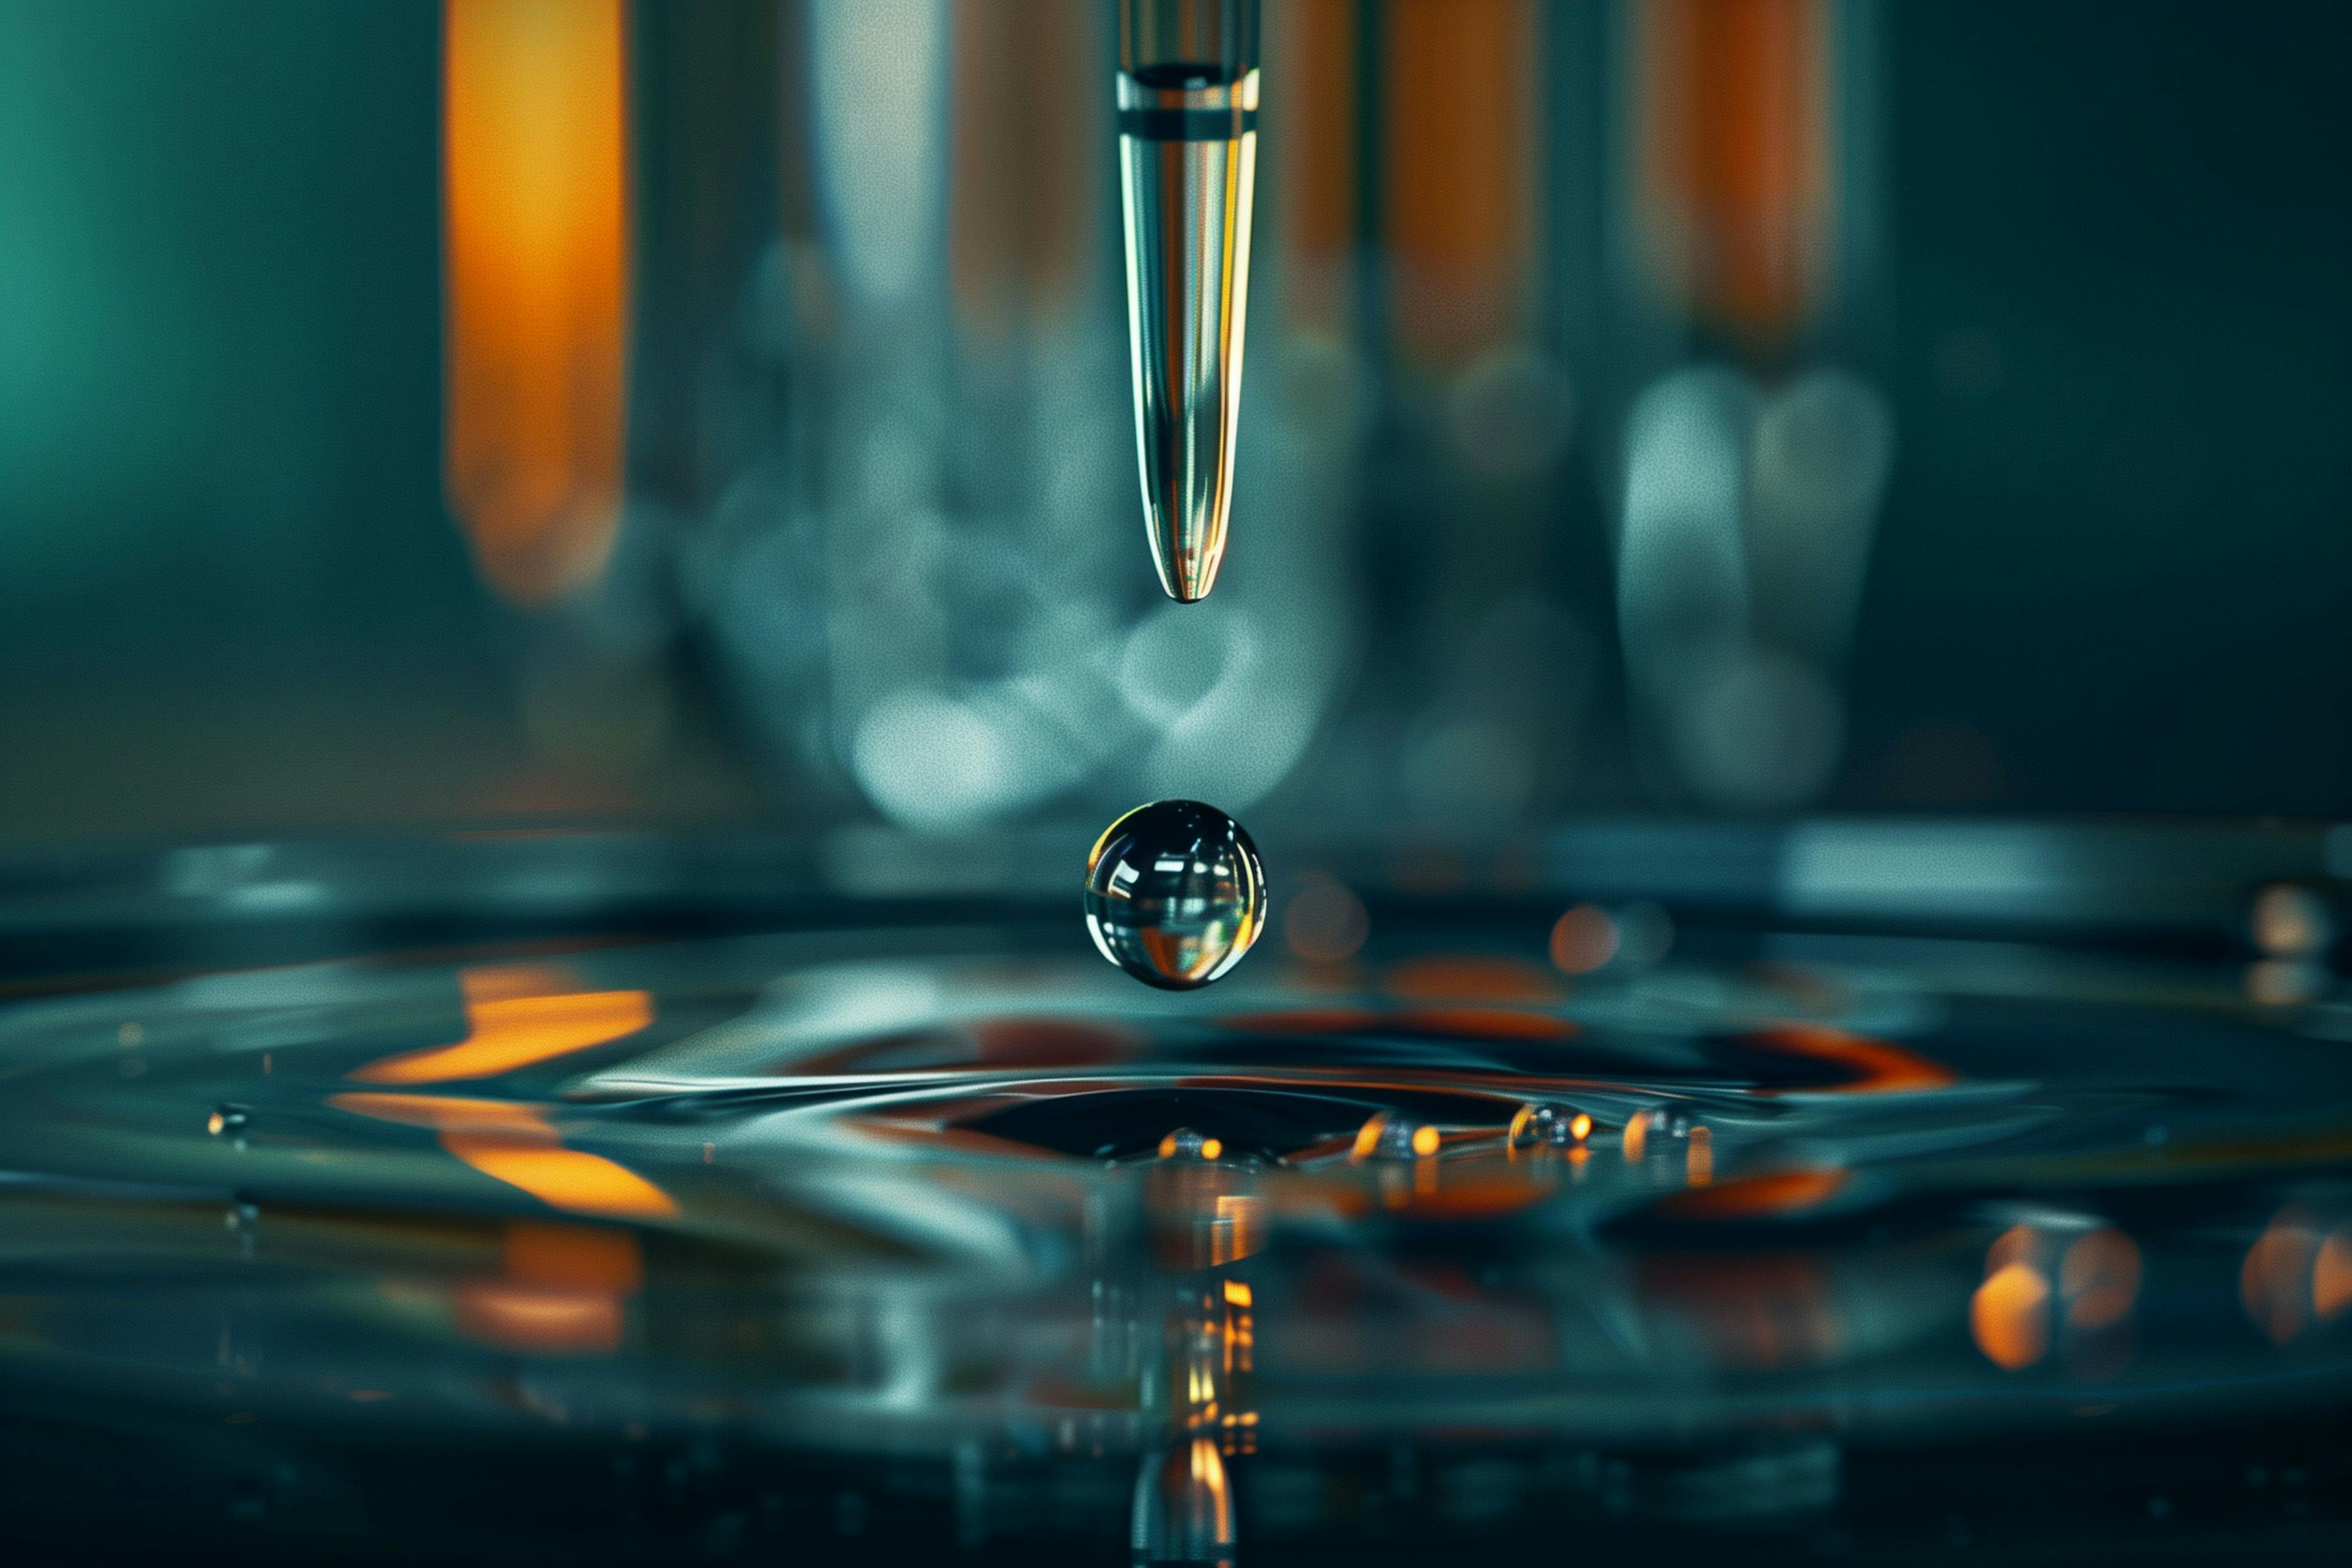 close-up capturing the moment of a single drop of liquid leaving a pipette tip during a biomedical test, symbolizing the crucial step in sample preparation for diagnostic analysis, | Image Credit: © forenna - stock.adobe.com